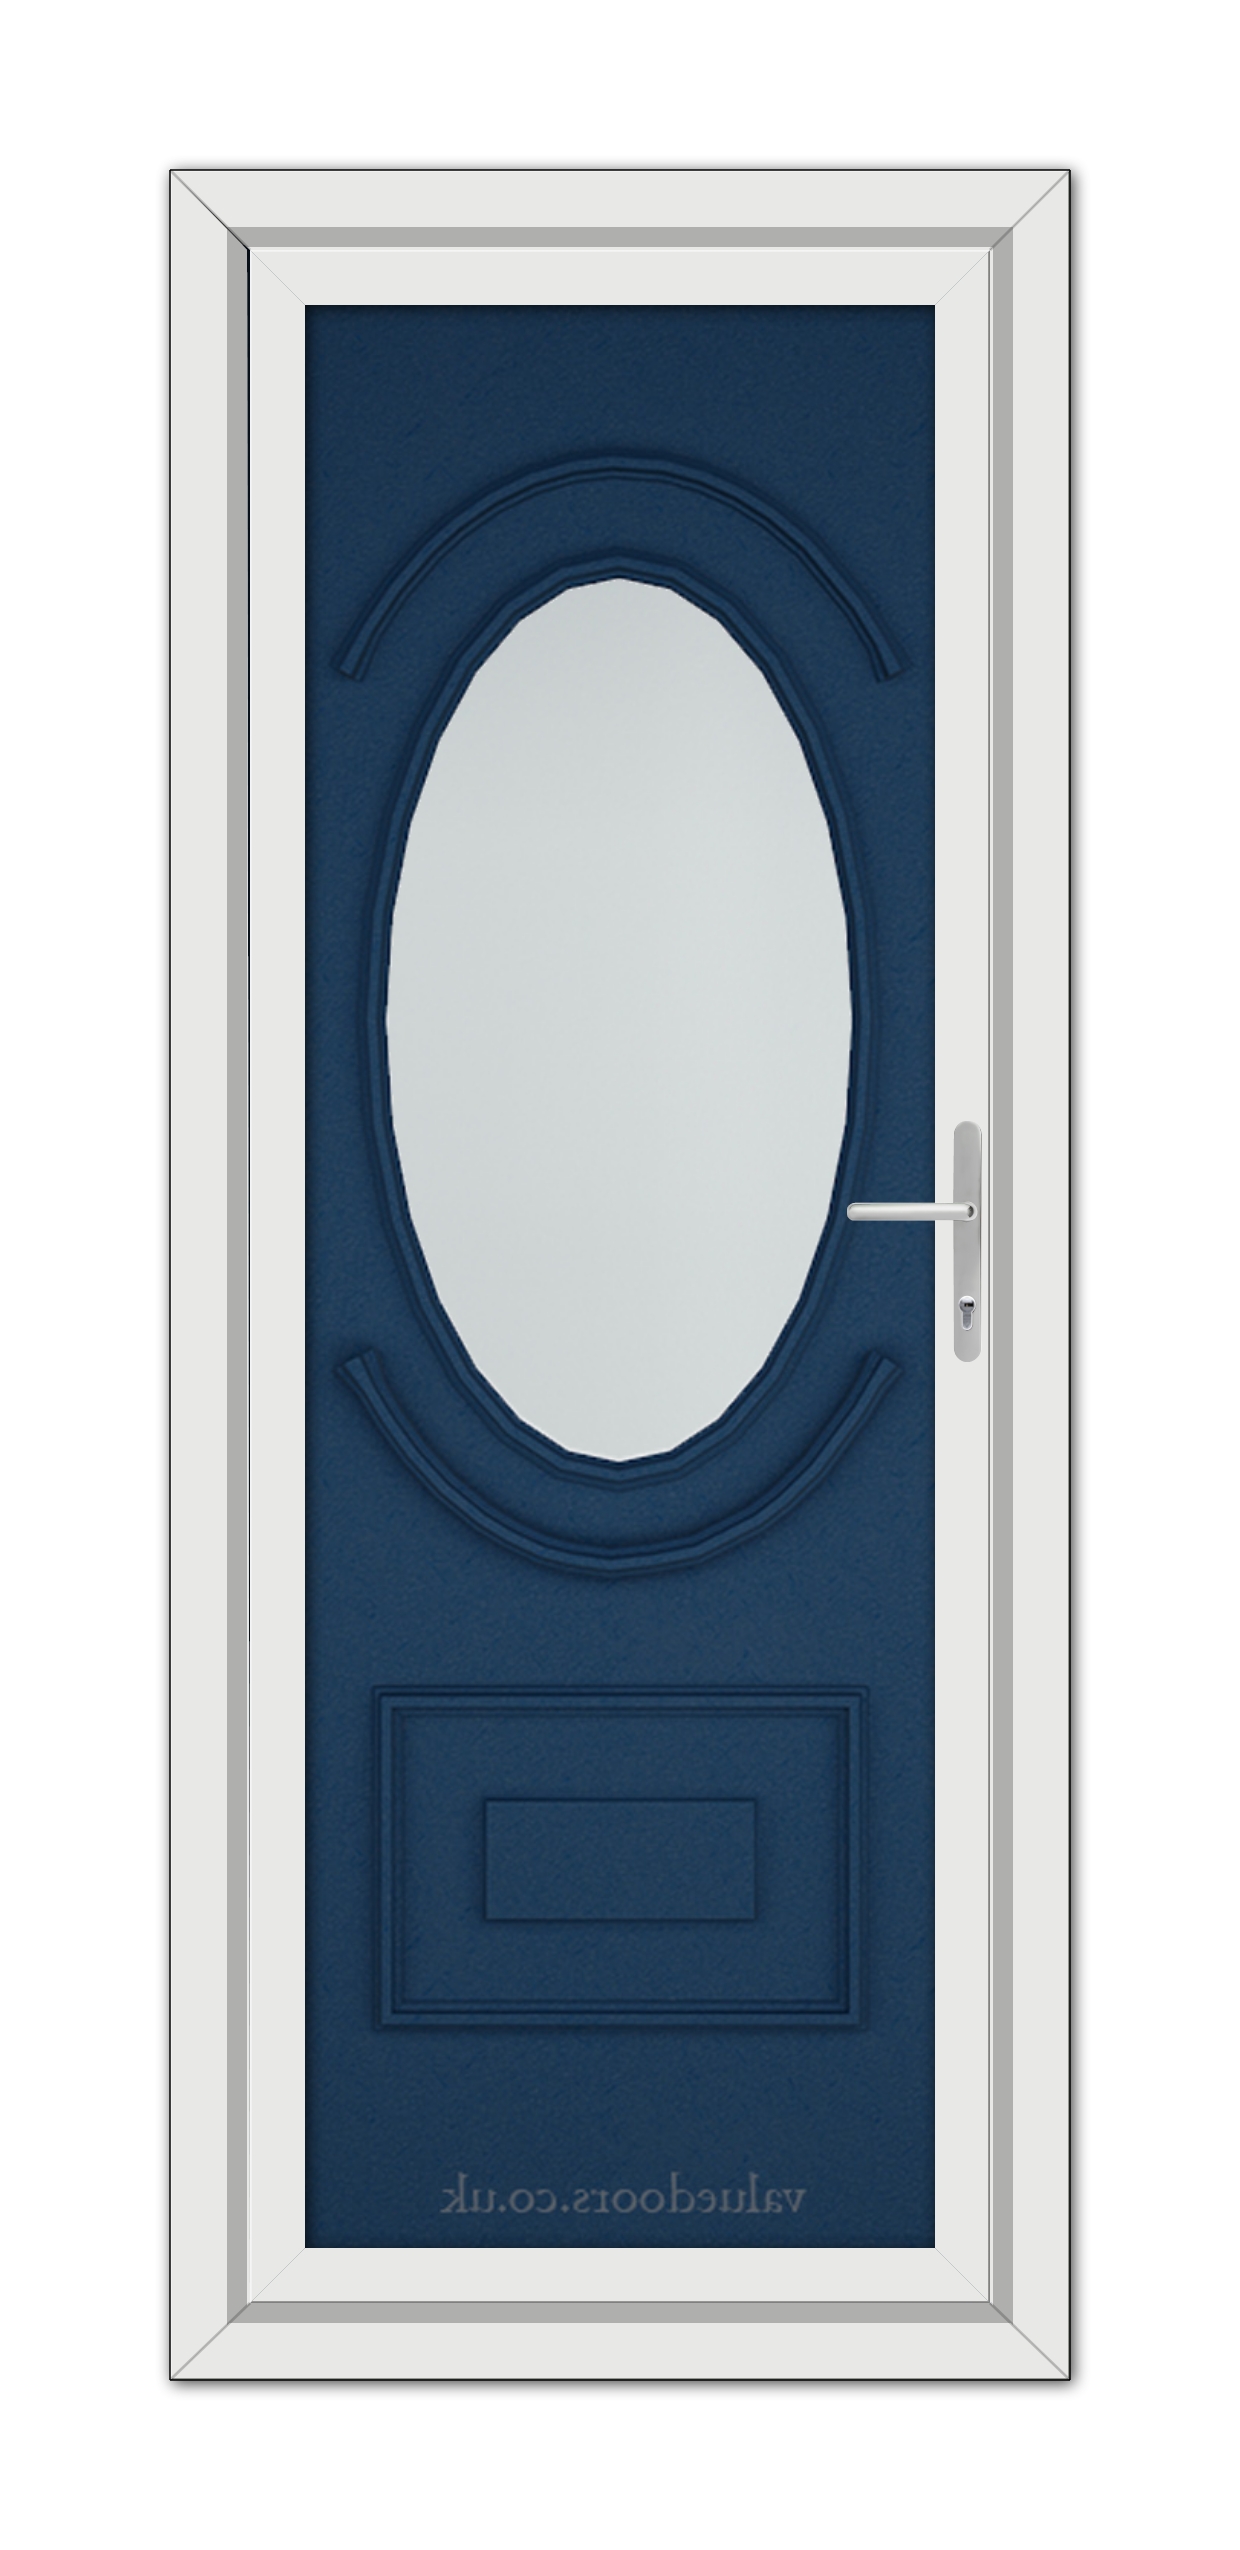 A vertical image of a closed, Blue Richmond uPVC Door with an oval window, set within a white frame, viewed from the front.